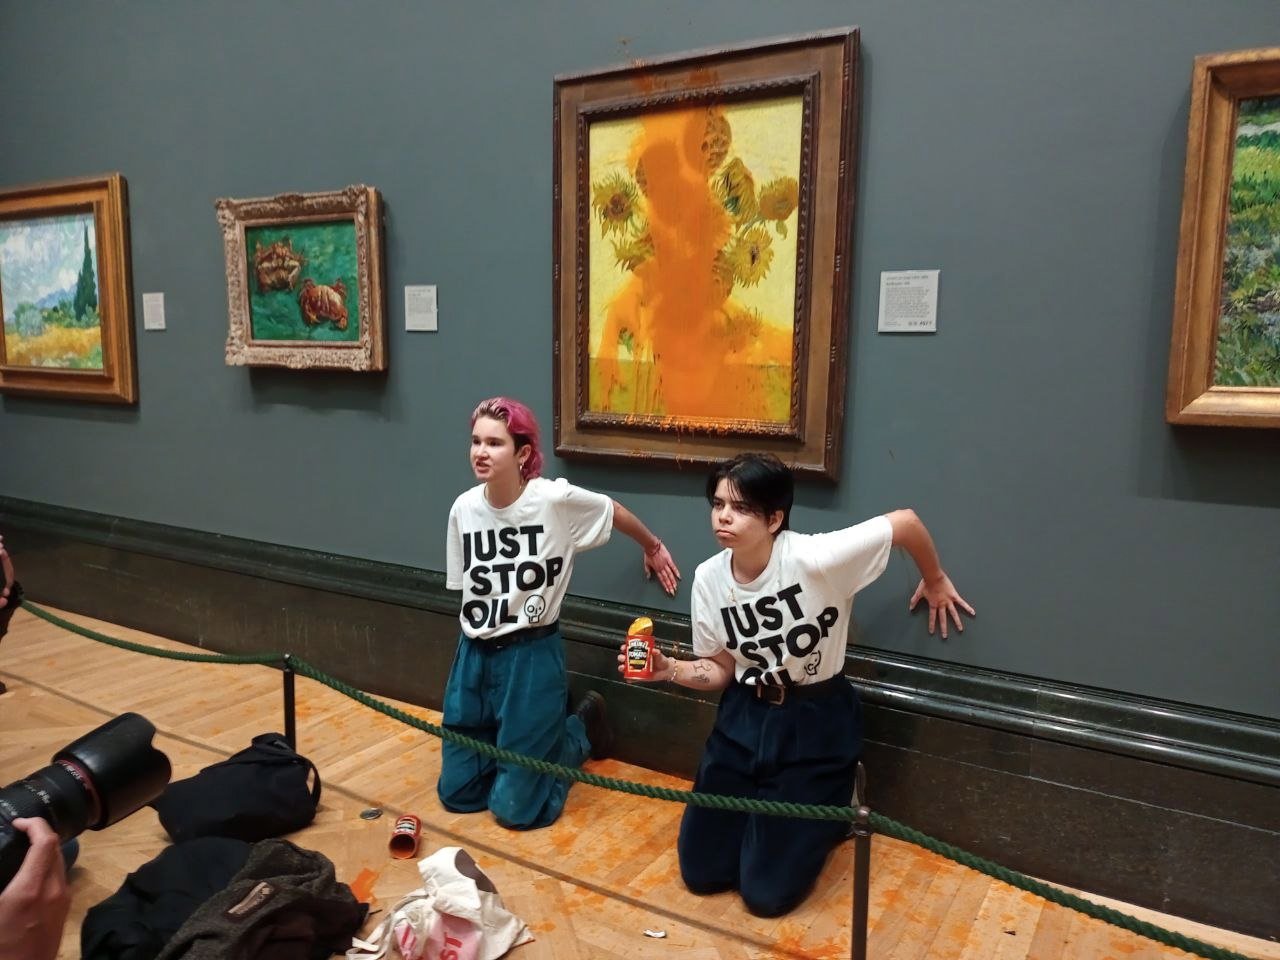 Climate activism group of two protesters who threw Heinz Tomato soup at Vincent Van Gogh&#039;s 1888 painting &quot;Sunflowers&quot; at the National Gallery in London, U.K., Oct. 14, 2022. (Just Stop Oil handout photo via EPA)